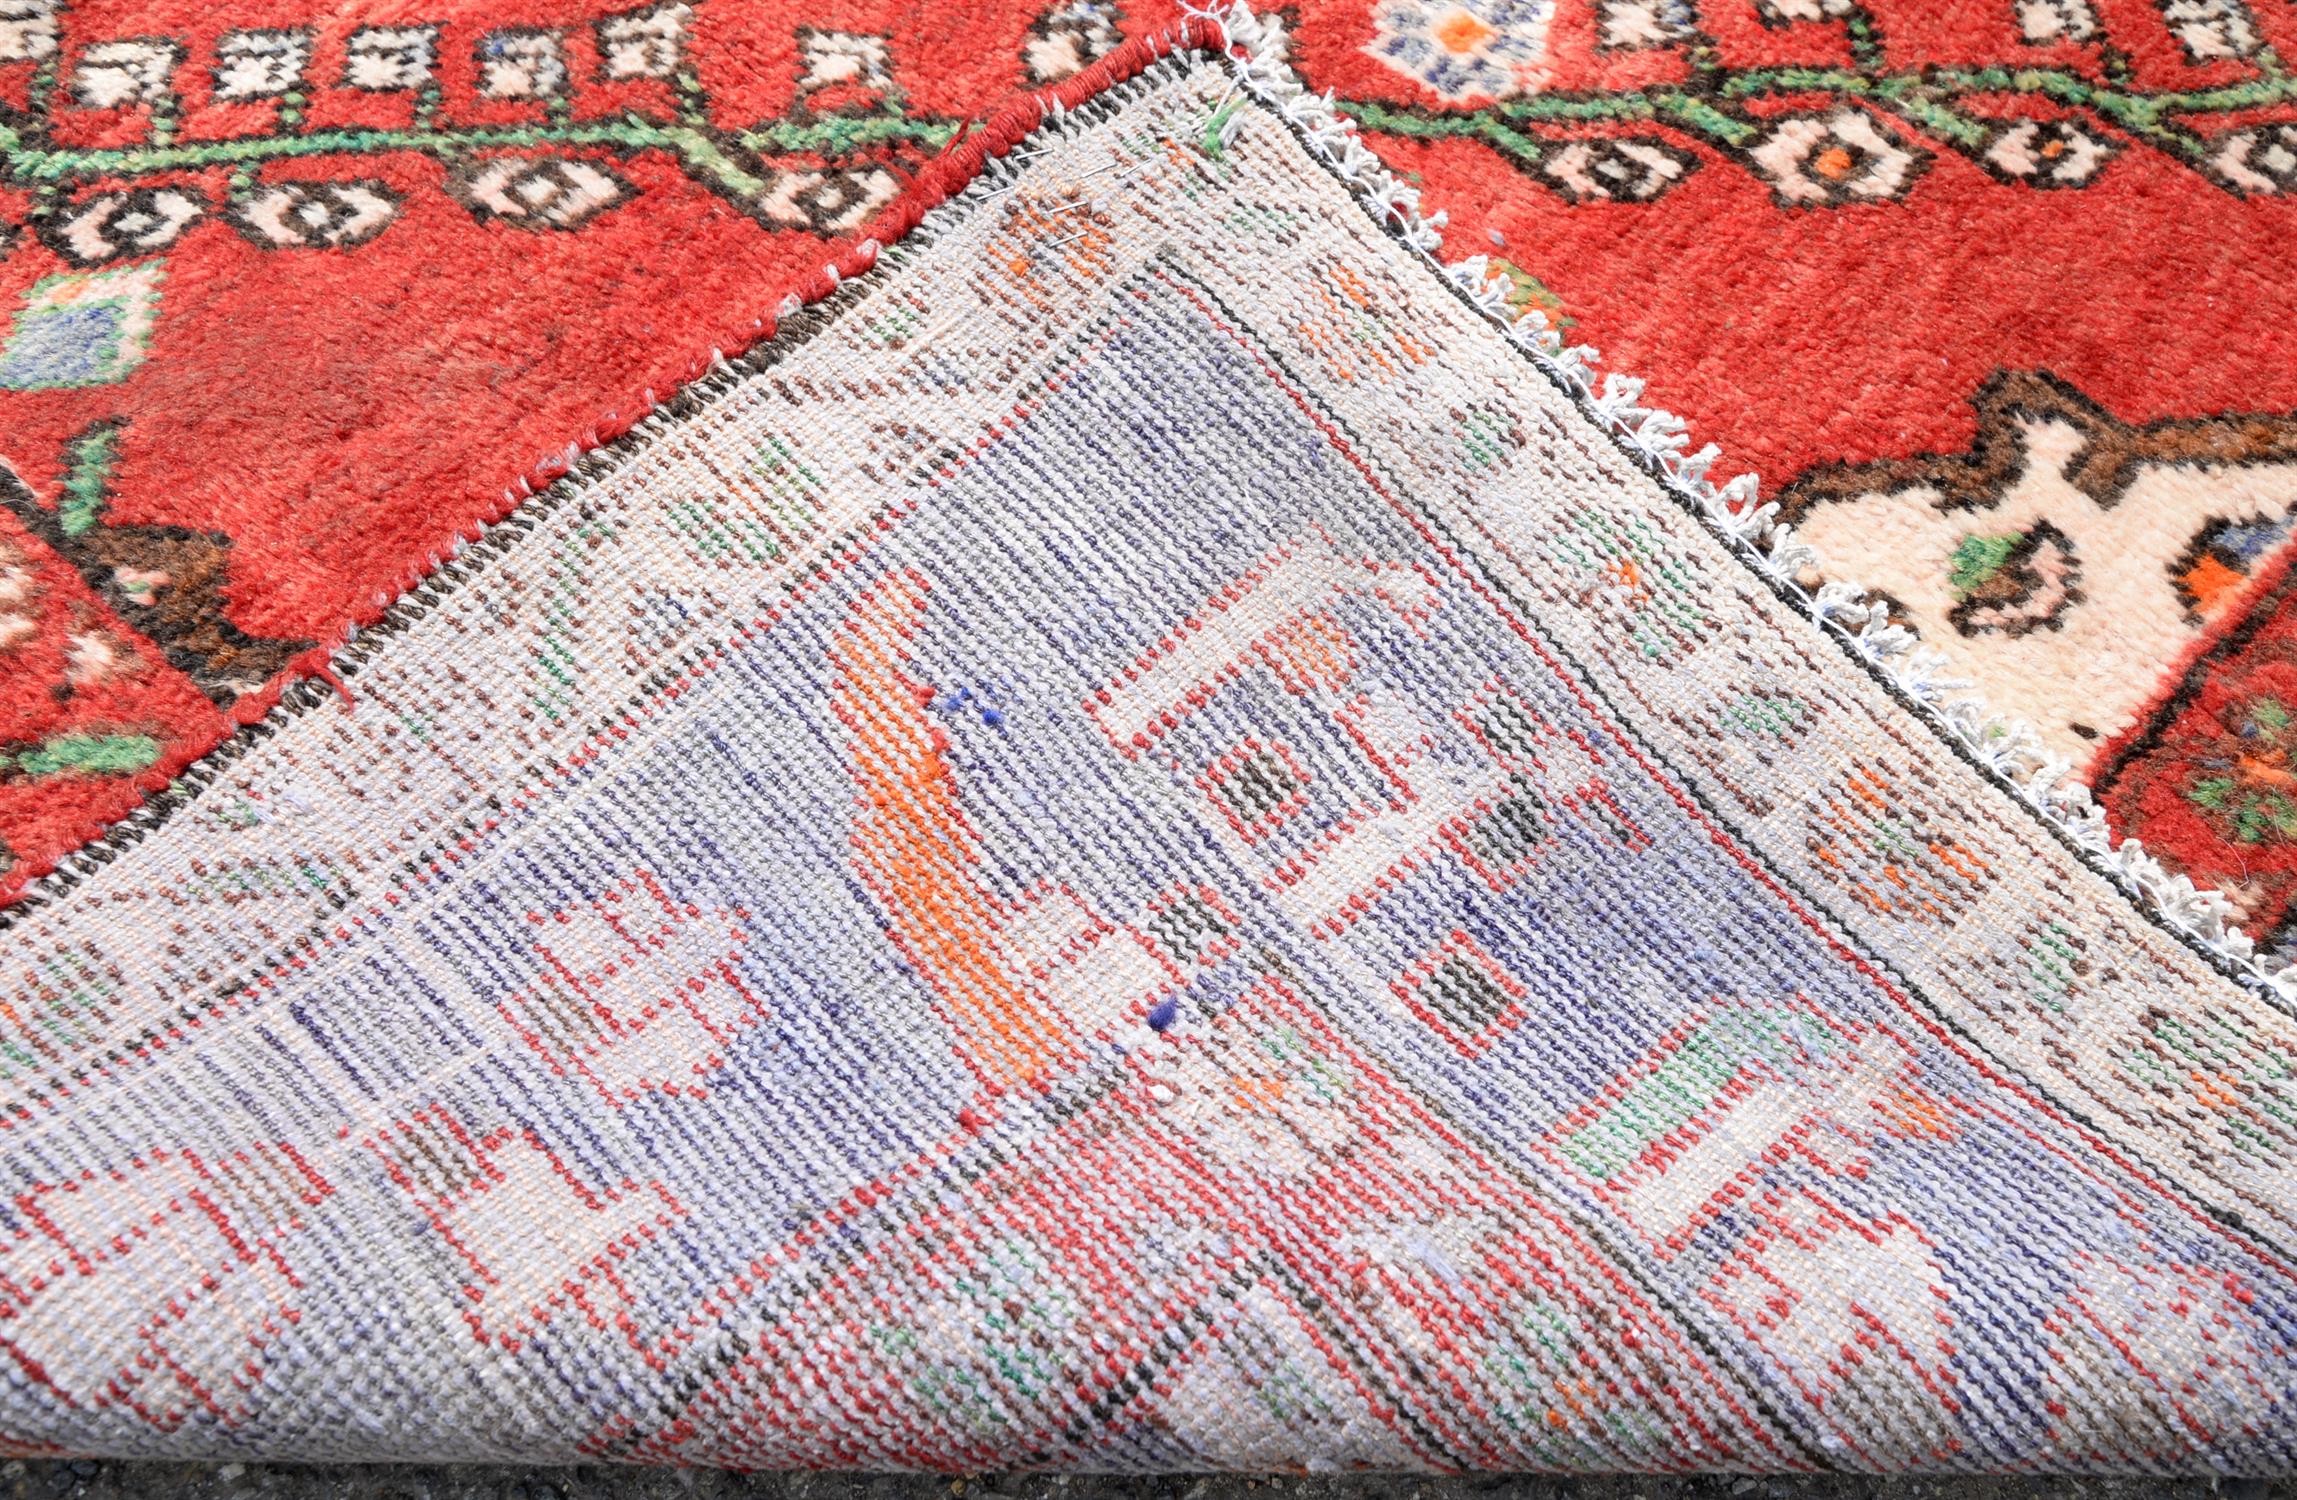 Persian Shiraz village carpet, with twin floral medallions on red ground with vine leaf and floral - Image 2 of 2